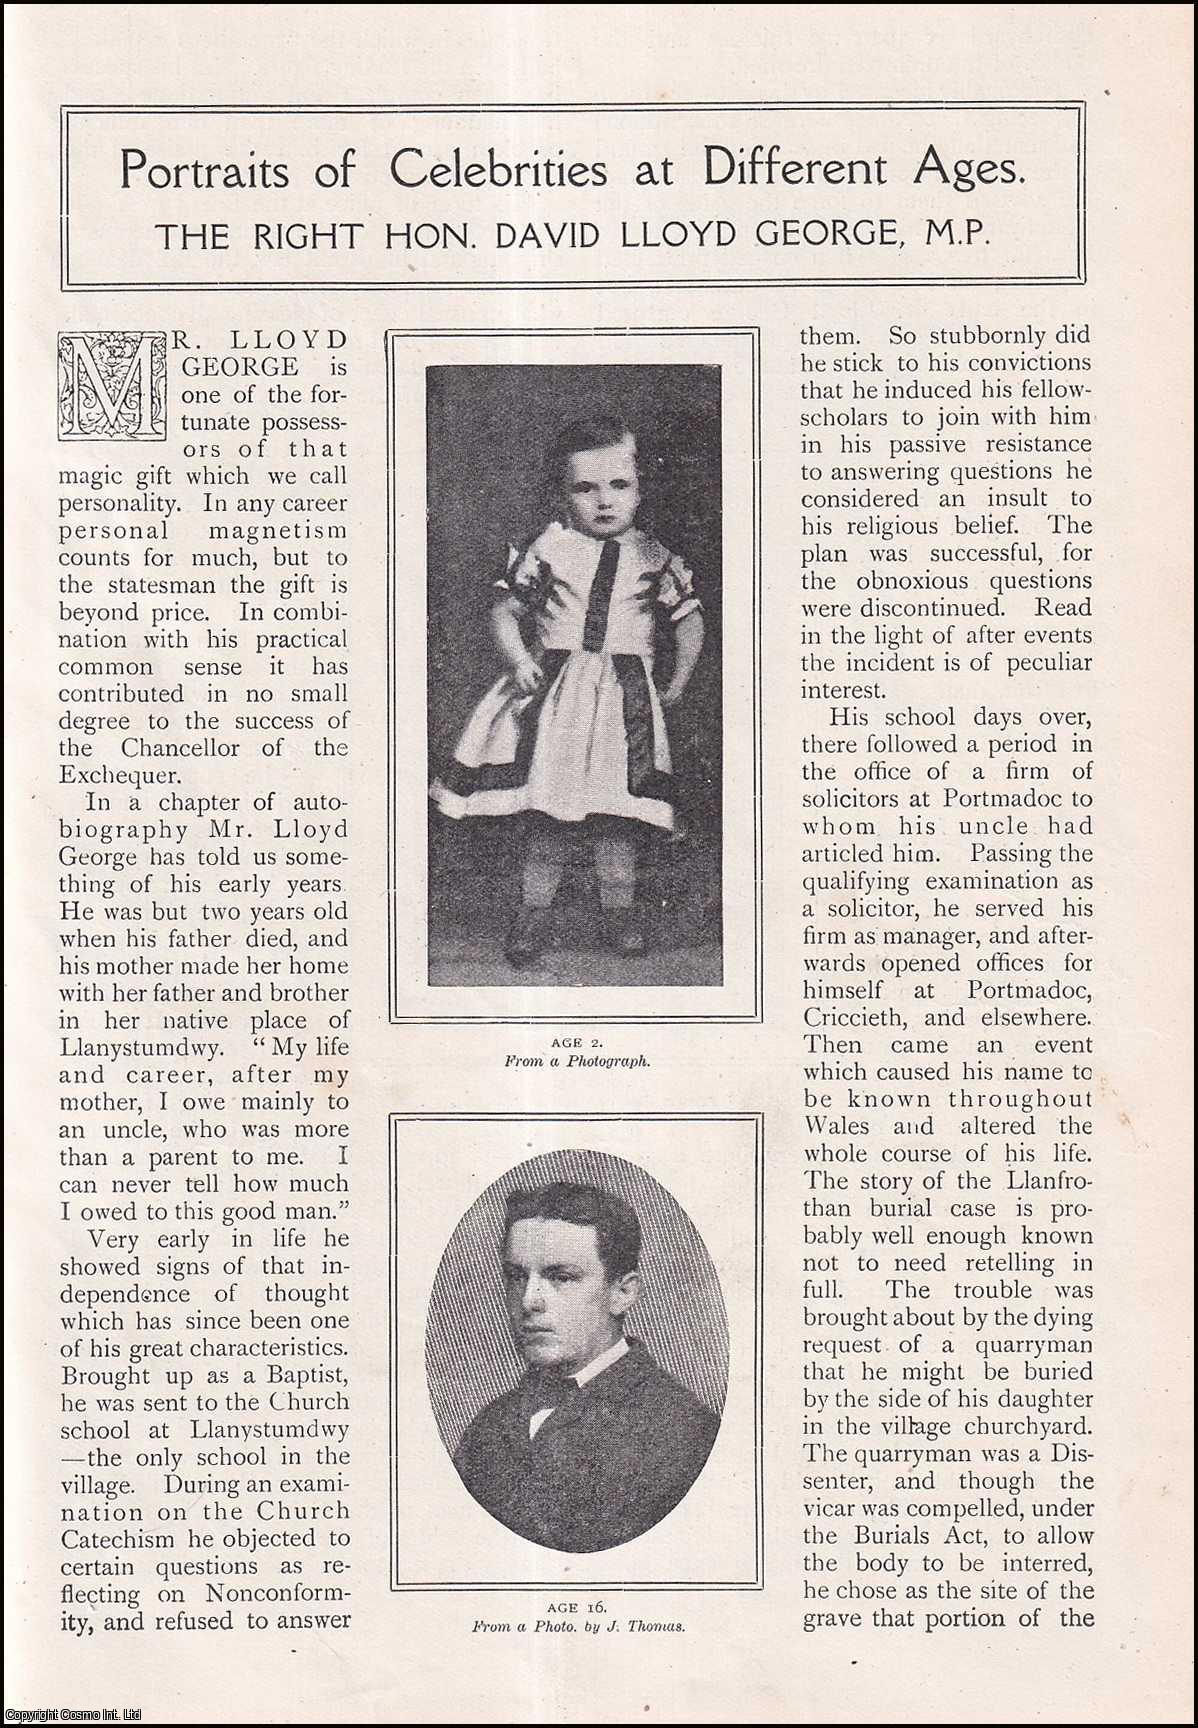 No Author Stated - The Right. Hon. David Lloyd George, M.P. Portraits of Celebrities at Different Ages. An uncommon original article from The Strand Magazine, 1908.